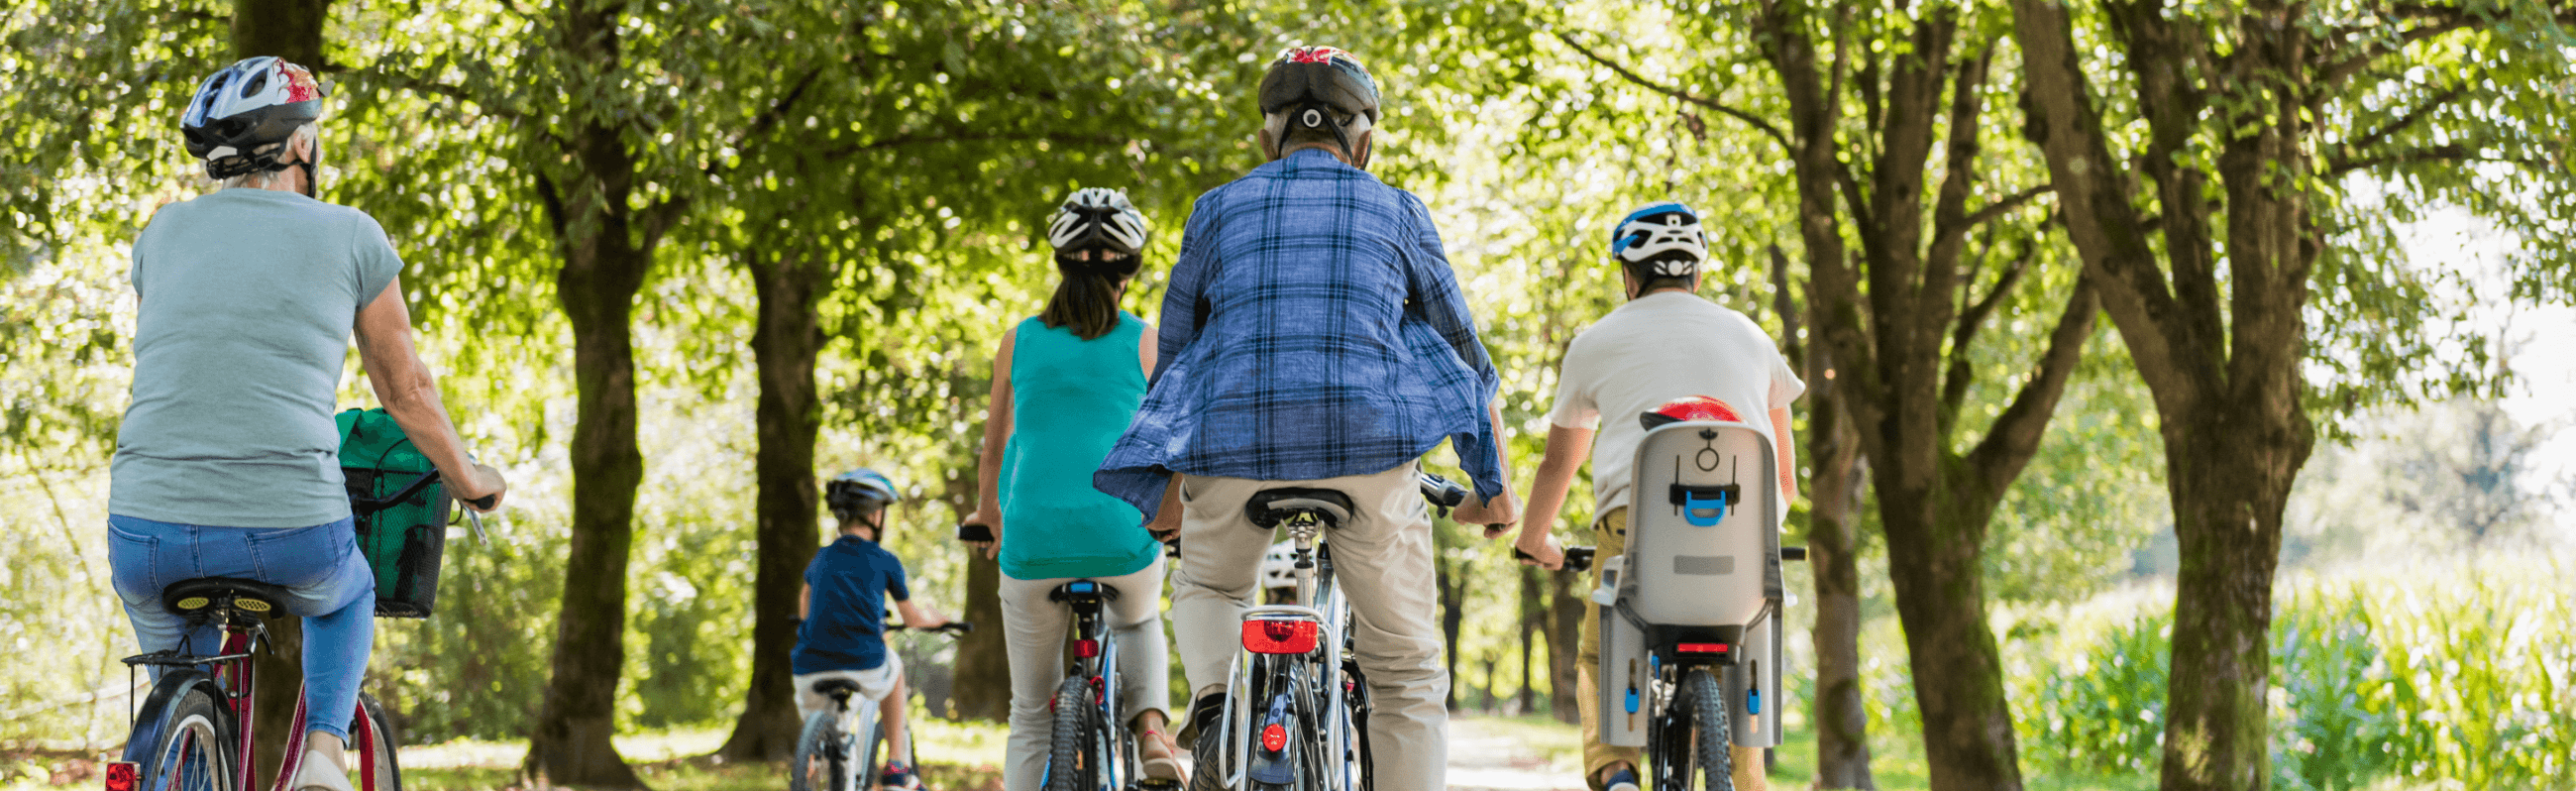 Photograph of a family on a bike ride